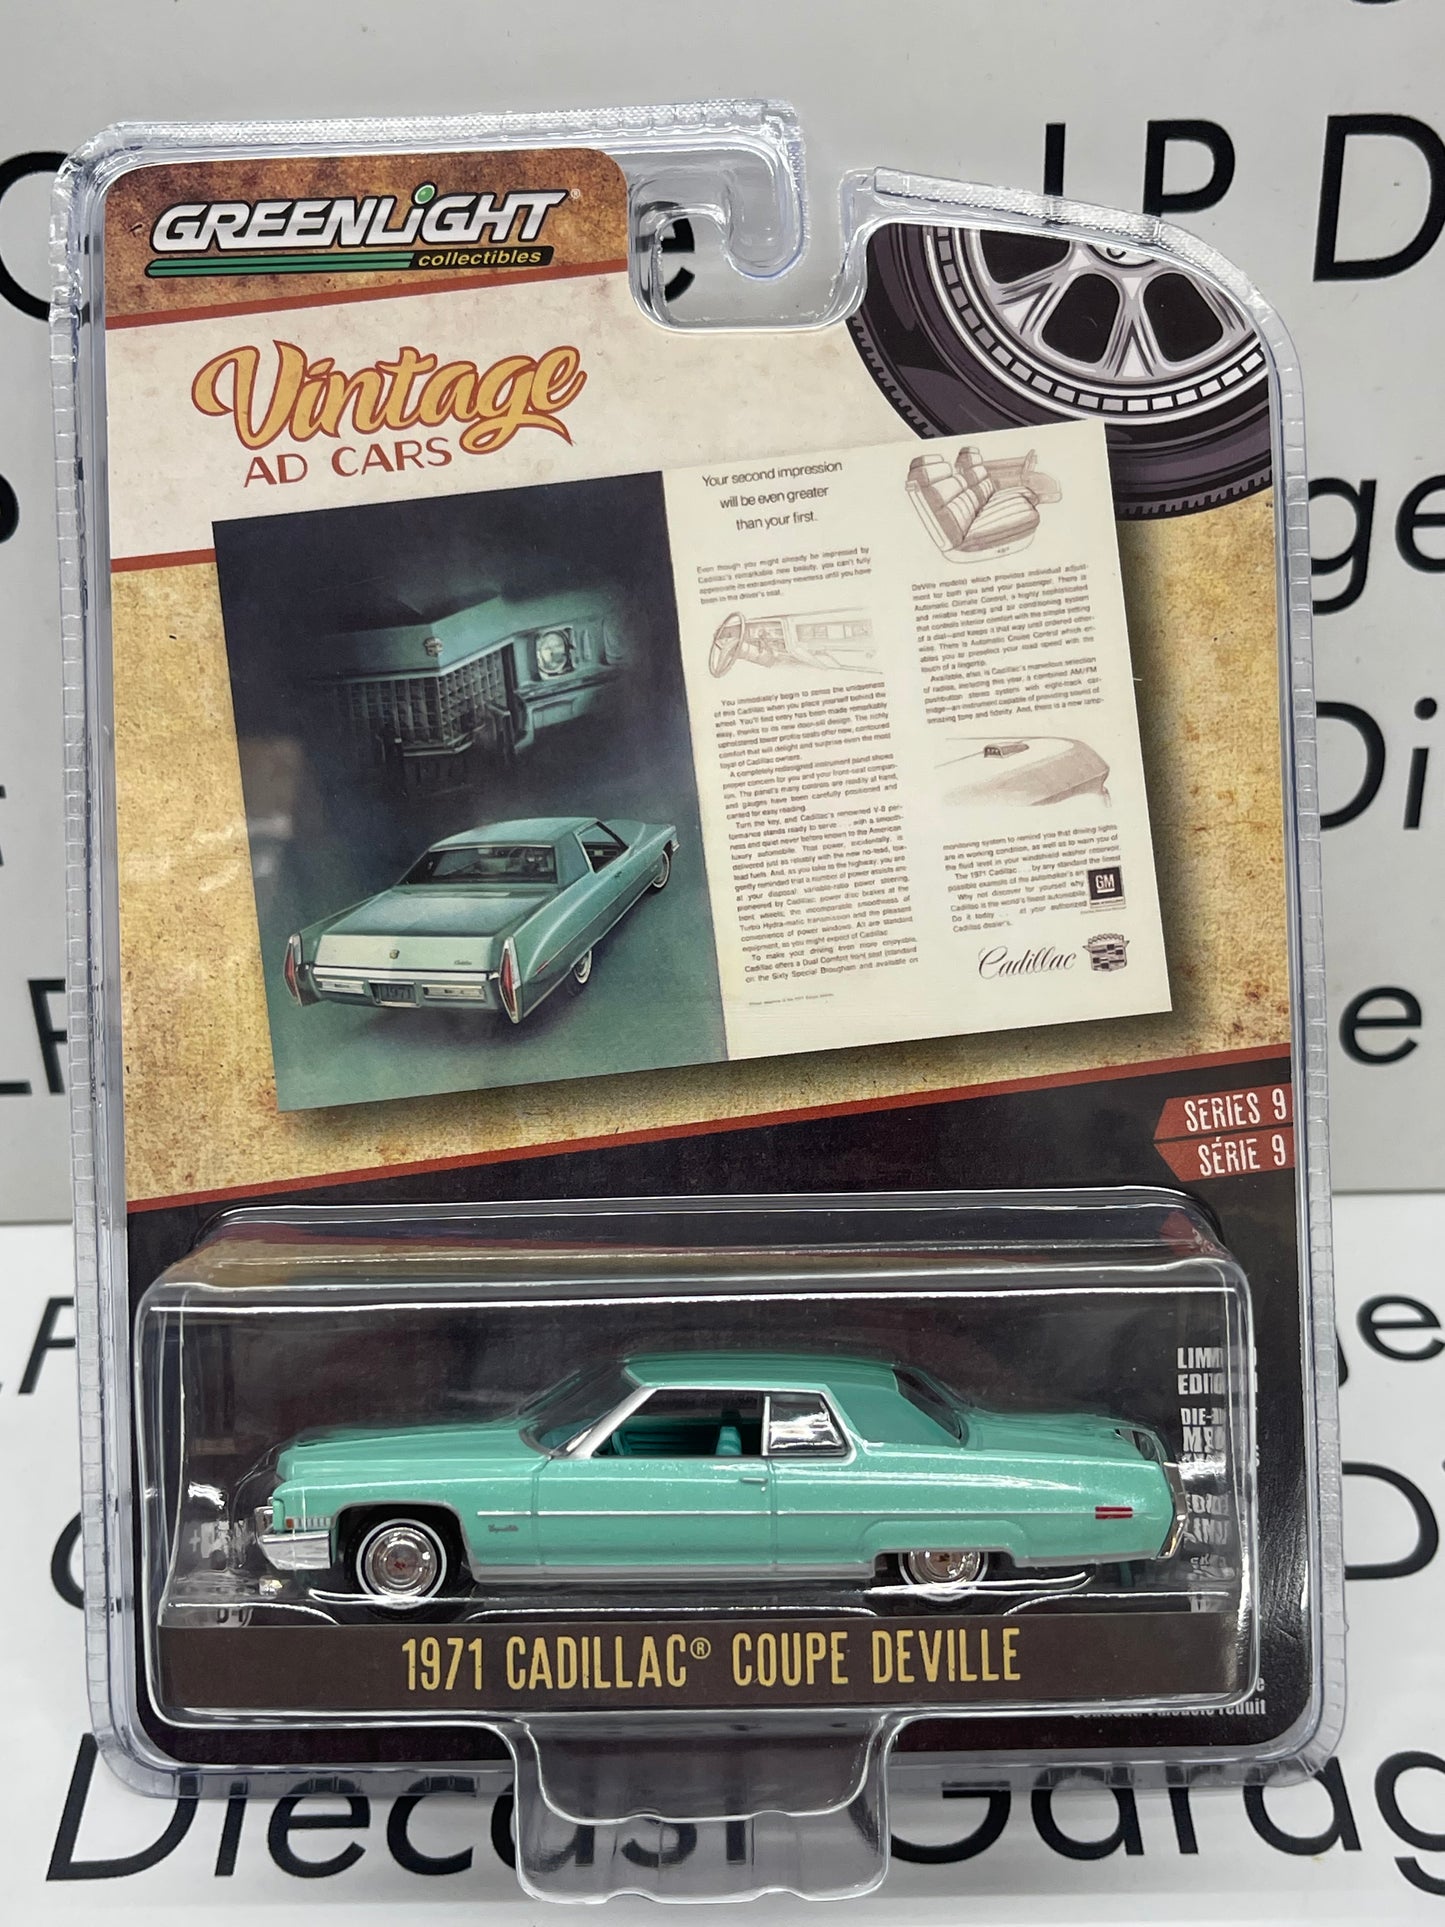 GREENLIGHT 1971 Cadillac Coupe Deville Turquoise Vintage Ad Cars 1:64 Diecast